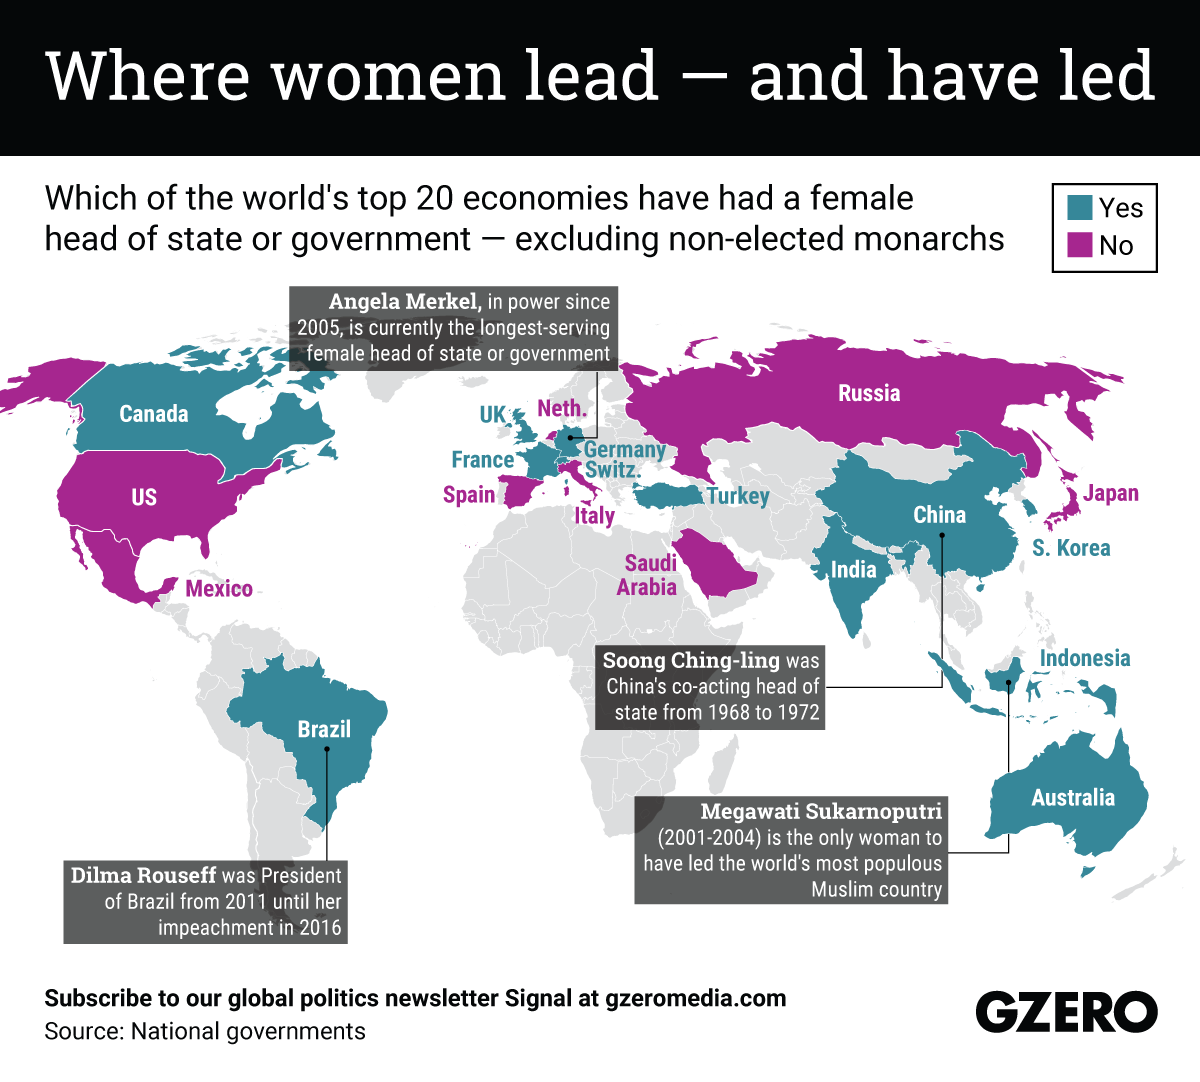 The Graphic Truth: Where women lead — and have led